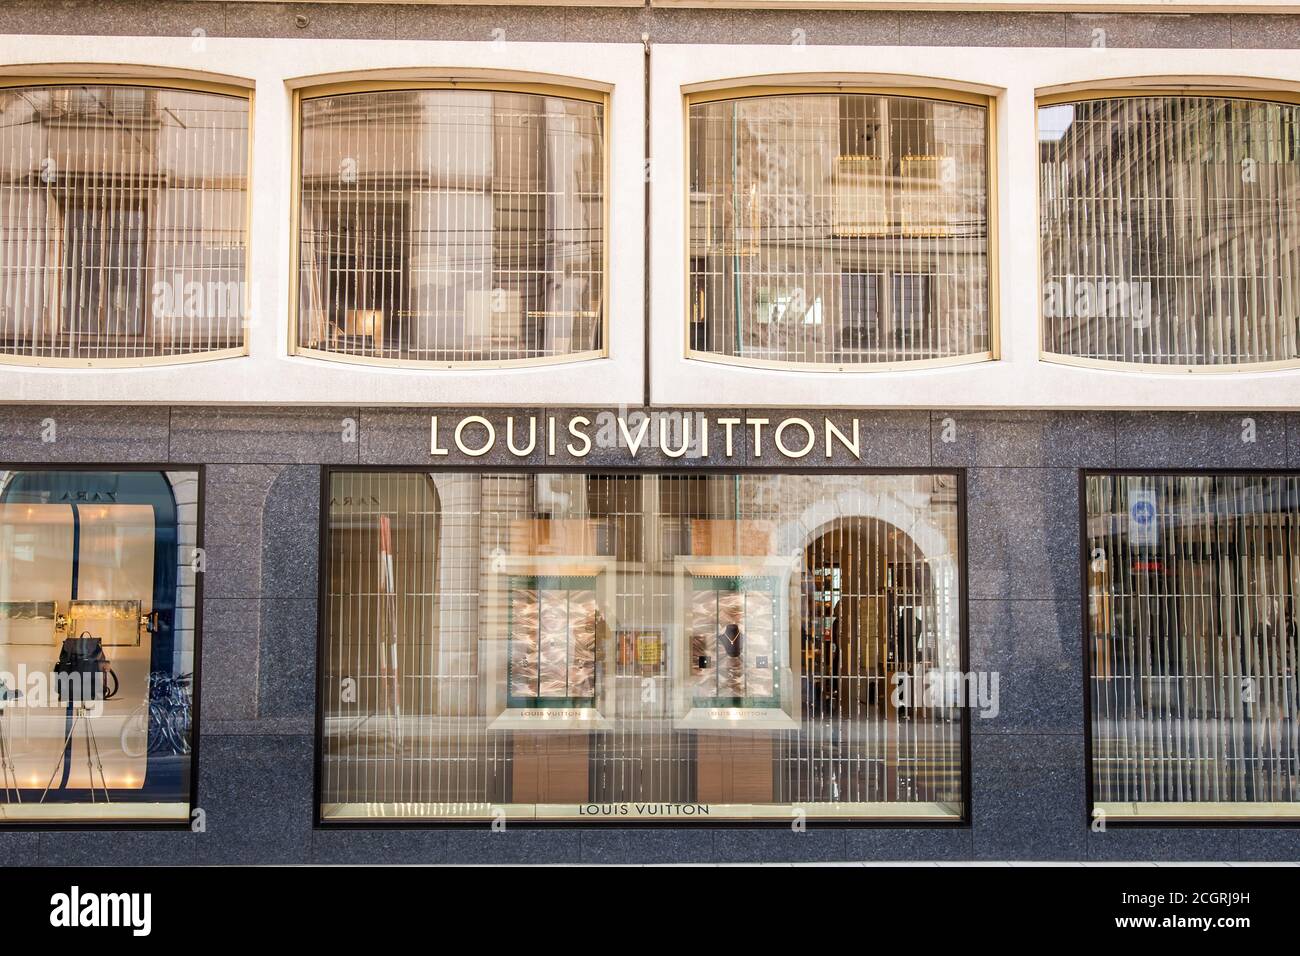 Geneva, Switzerland - August 27, 2017 : Louis Vuitton store in Les Rues  Basses, Geneva. Les Rues Basses, located at the foot of the old town, is  Genev Stock Photo - Alamy